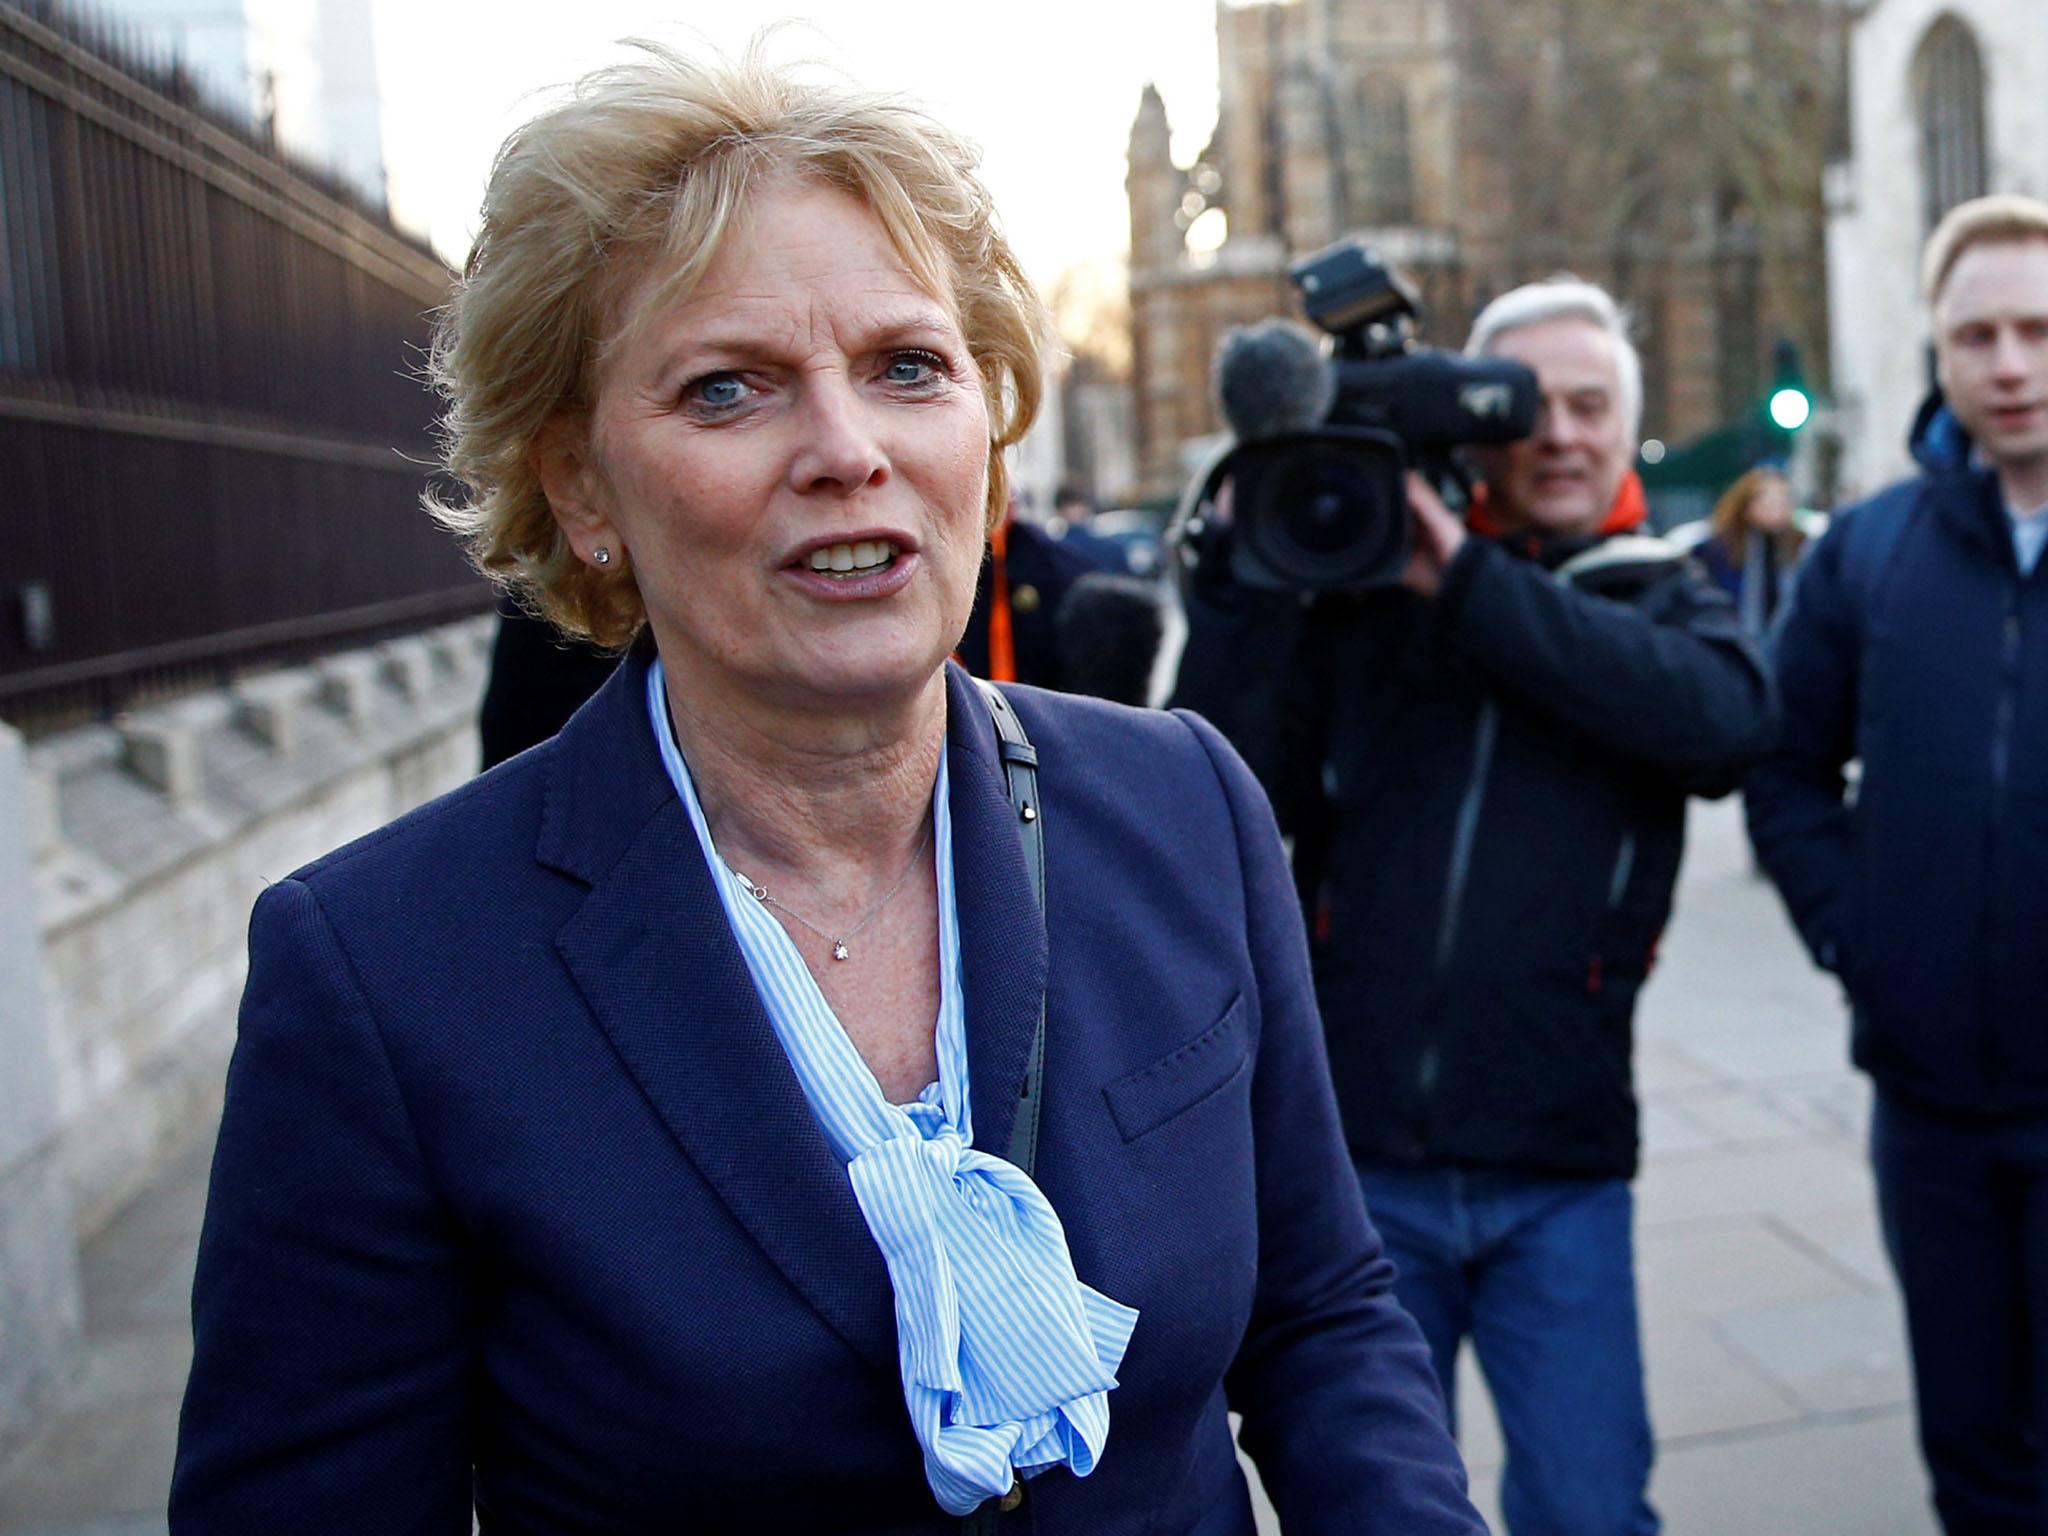 Anna Soubry lost her seat in the election after defecting from the Conservatives